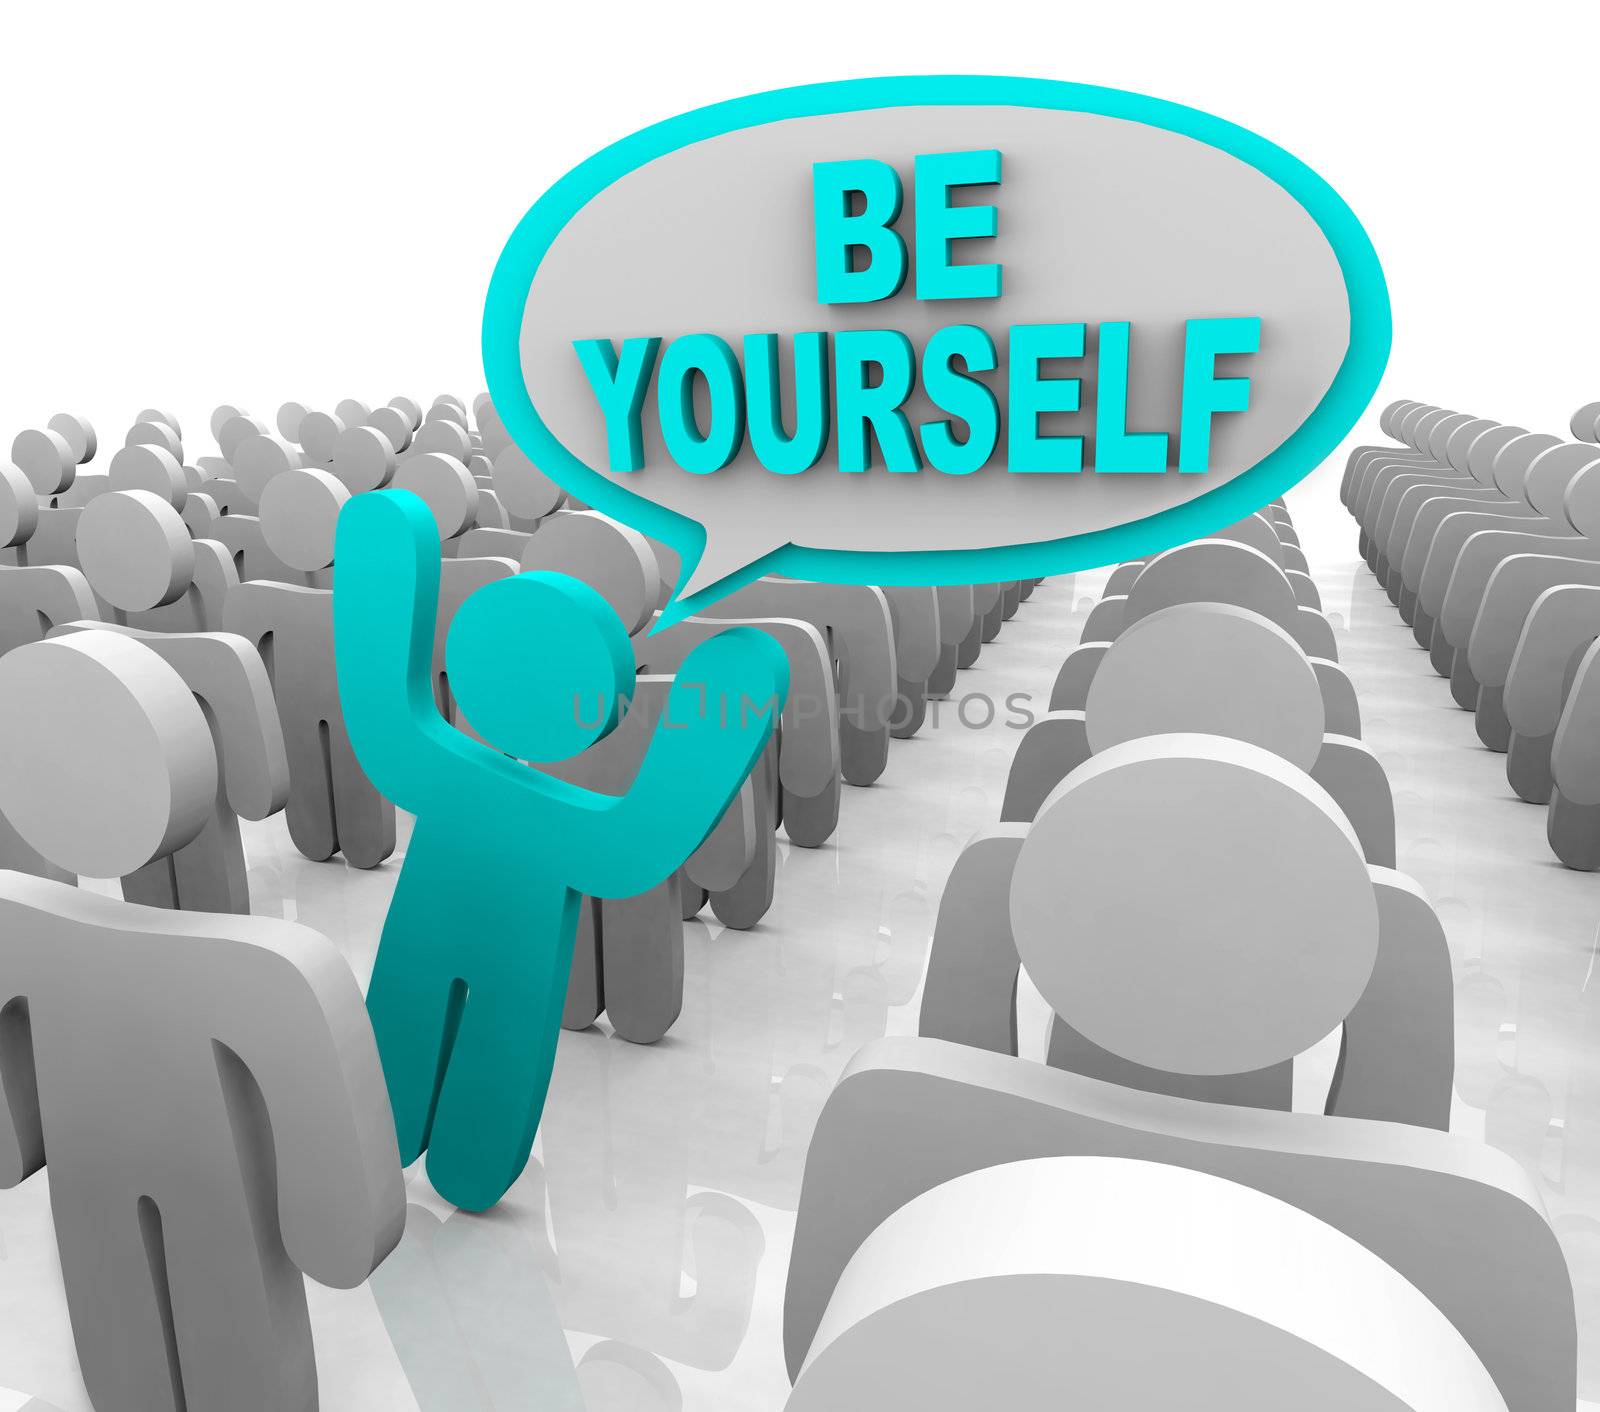 Be Yourself - One Different Person Standing Out in a Crowd by iQoncept